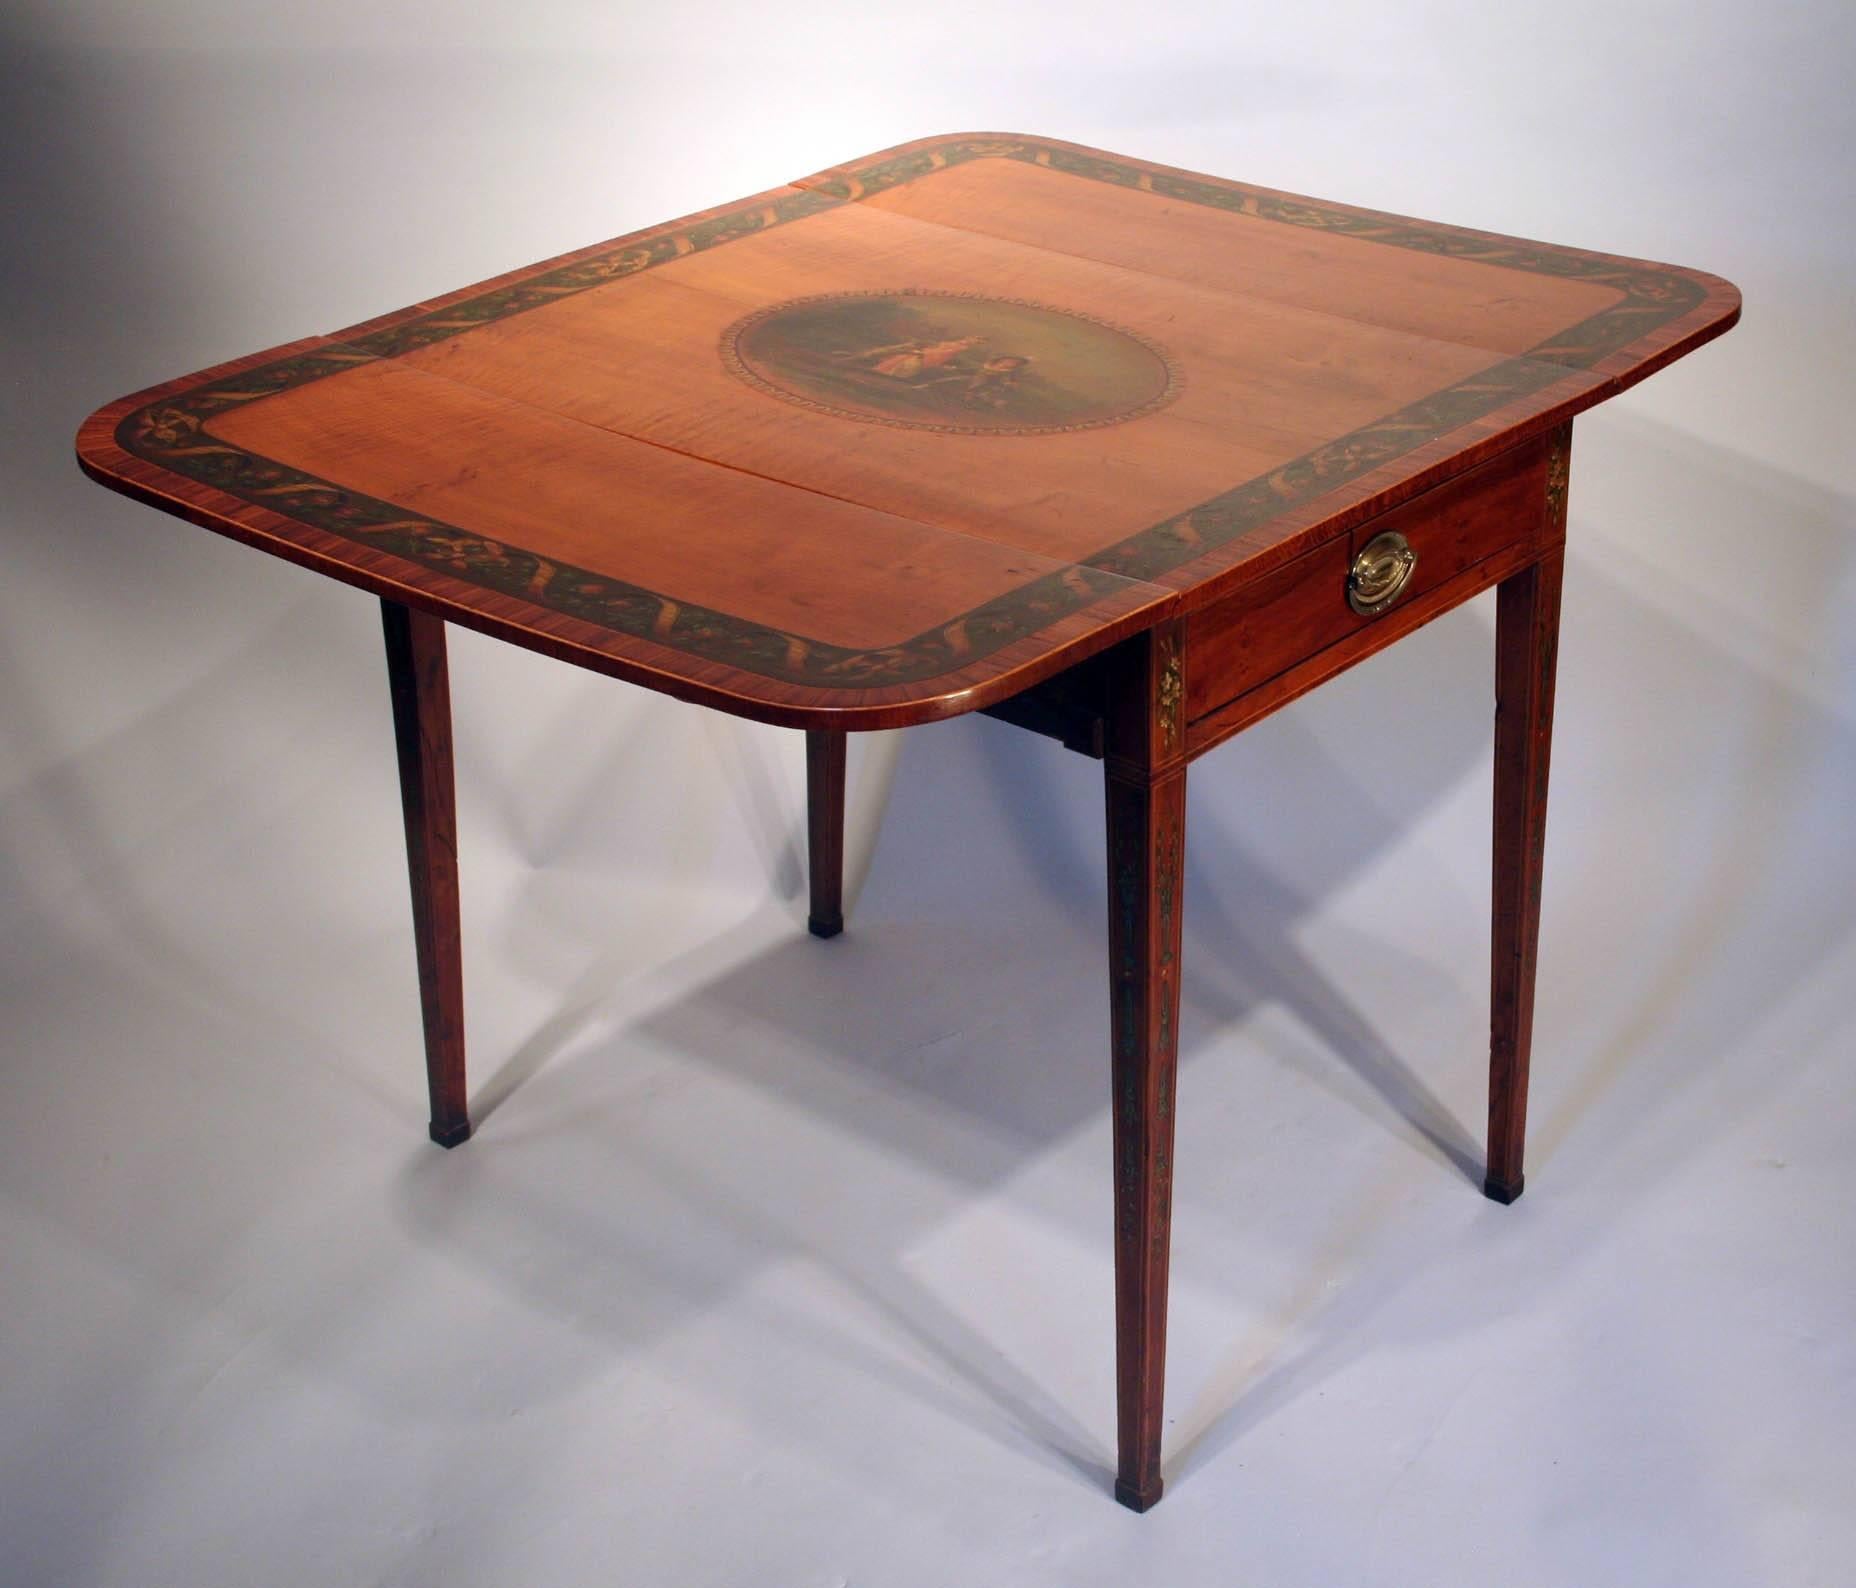 George III Painted Satinwood Pembroke Table, England, circa 1790 In Good Condition For Sale In Alexandria, VA